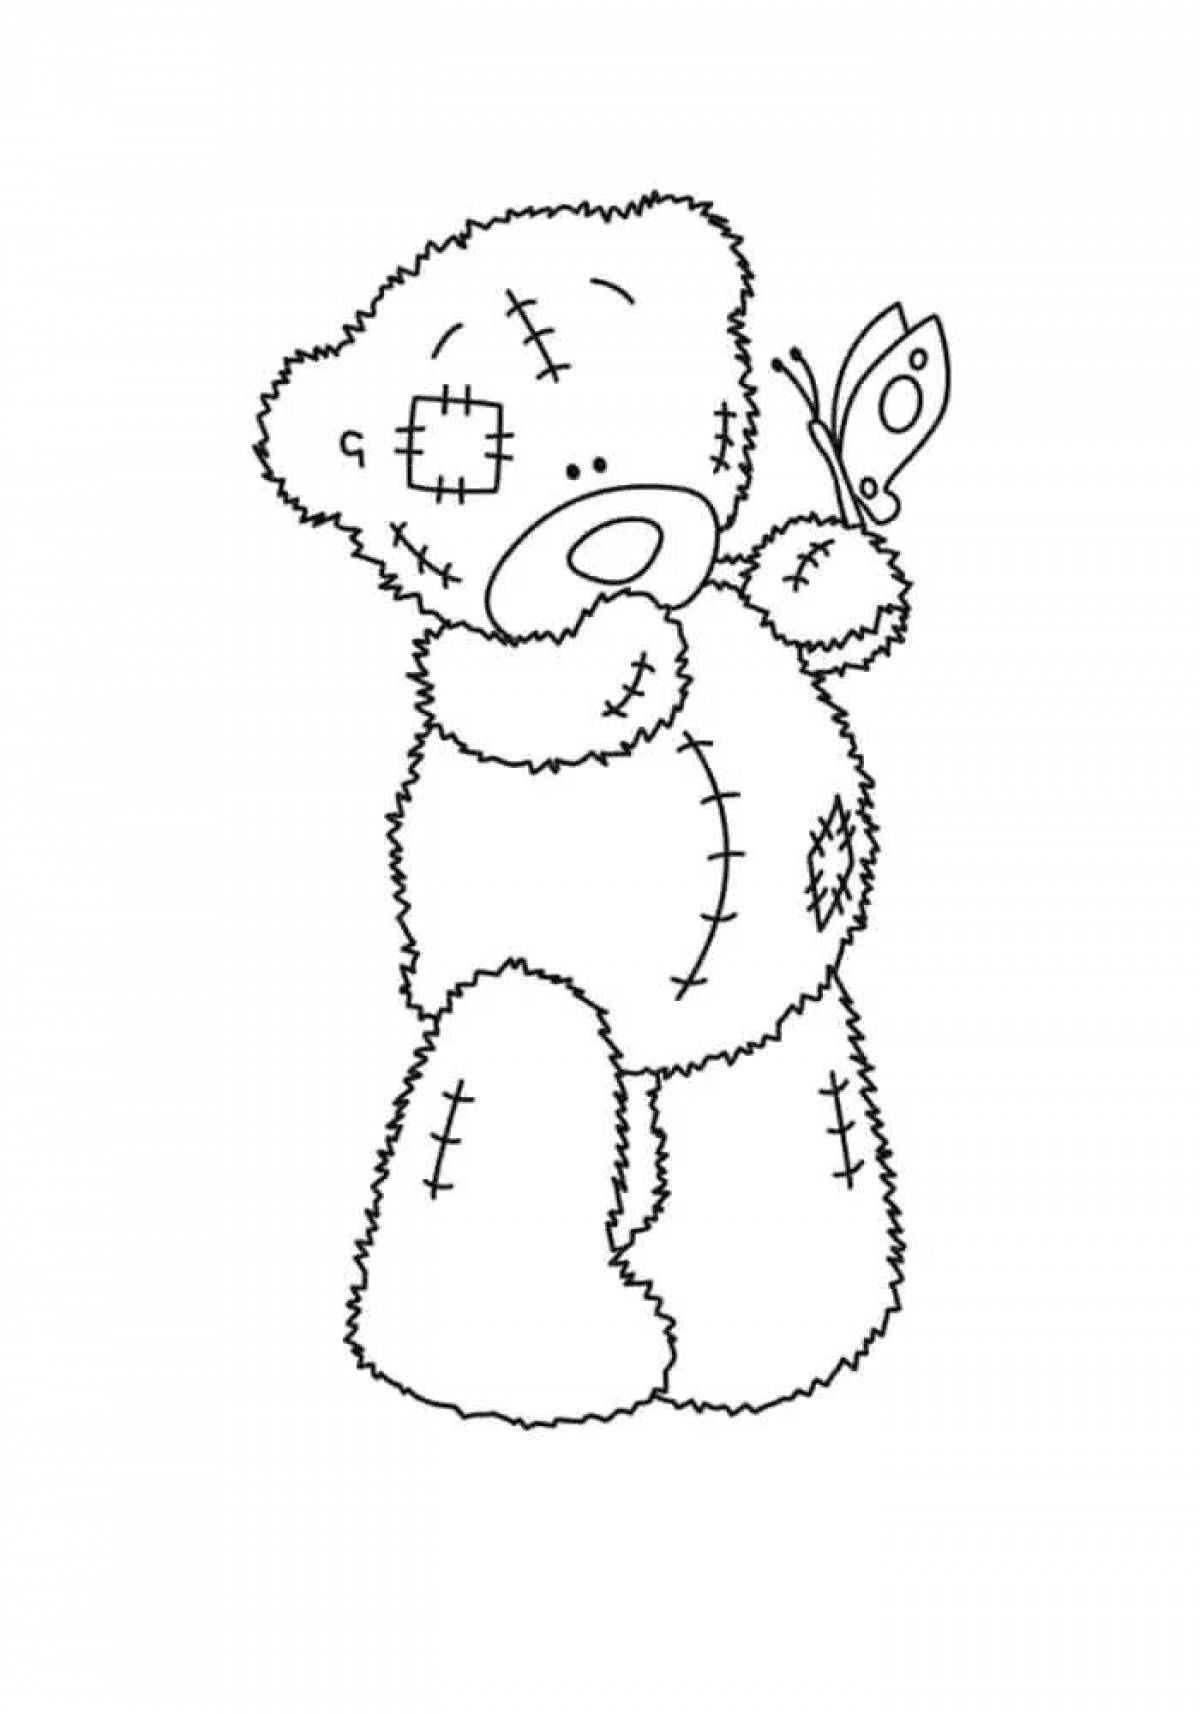 Squishy teddy bear coloring page